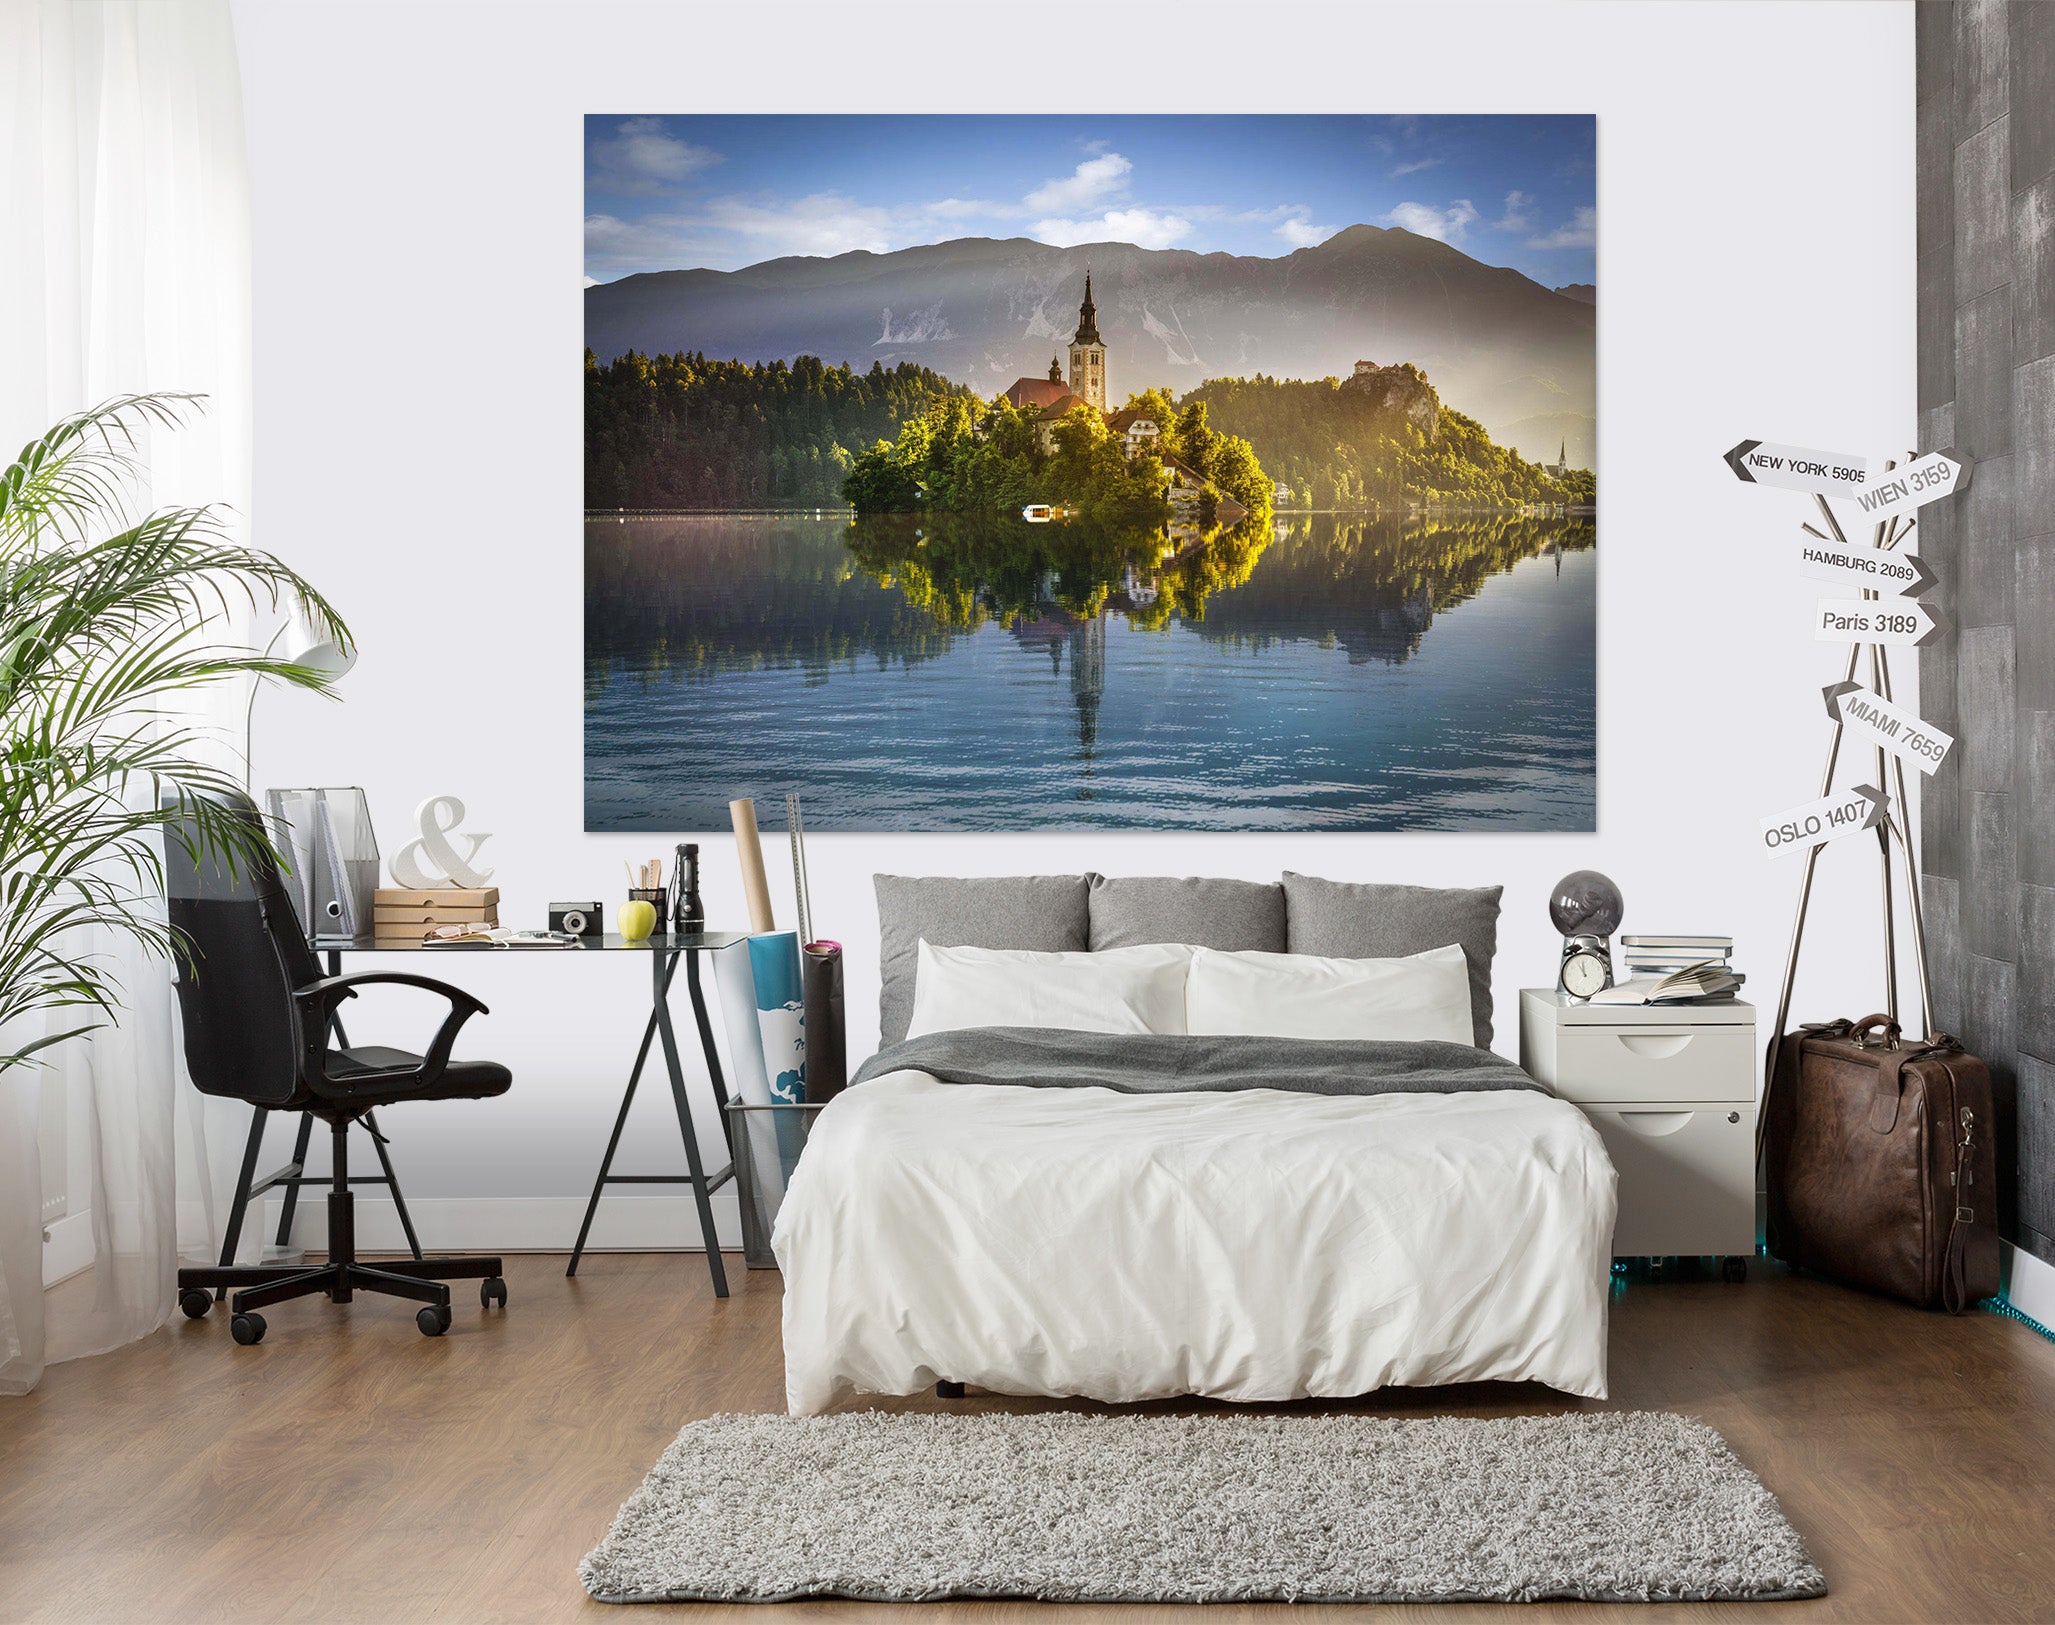 3D Forest Lake 113 Marco Carmassi Wall Sticker